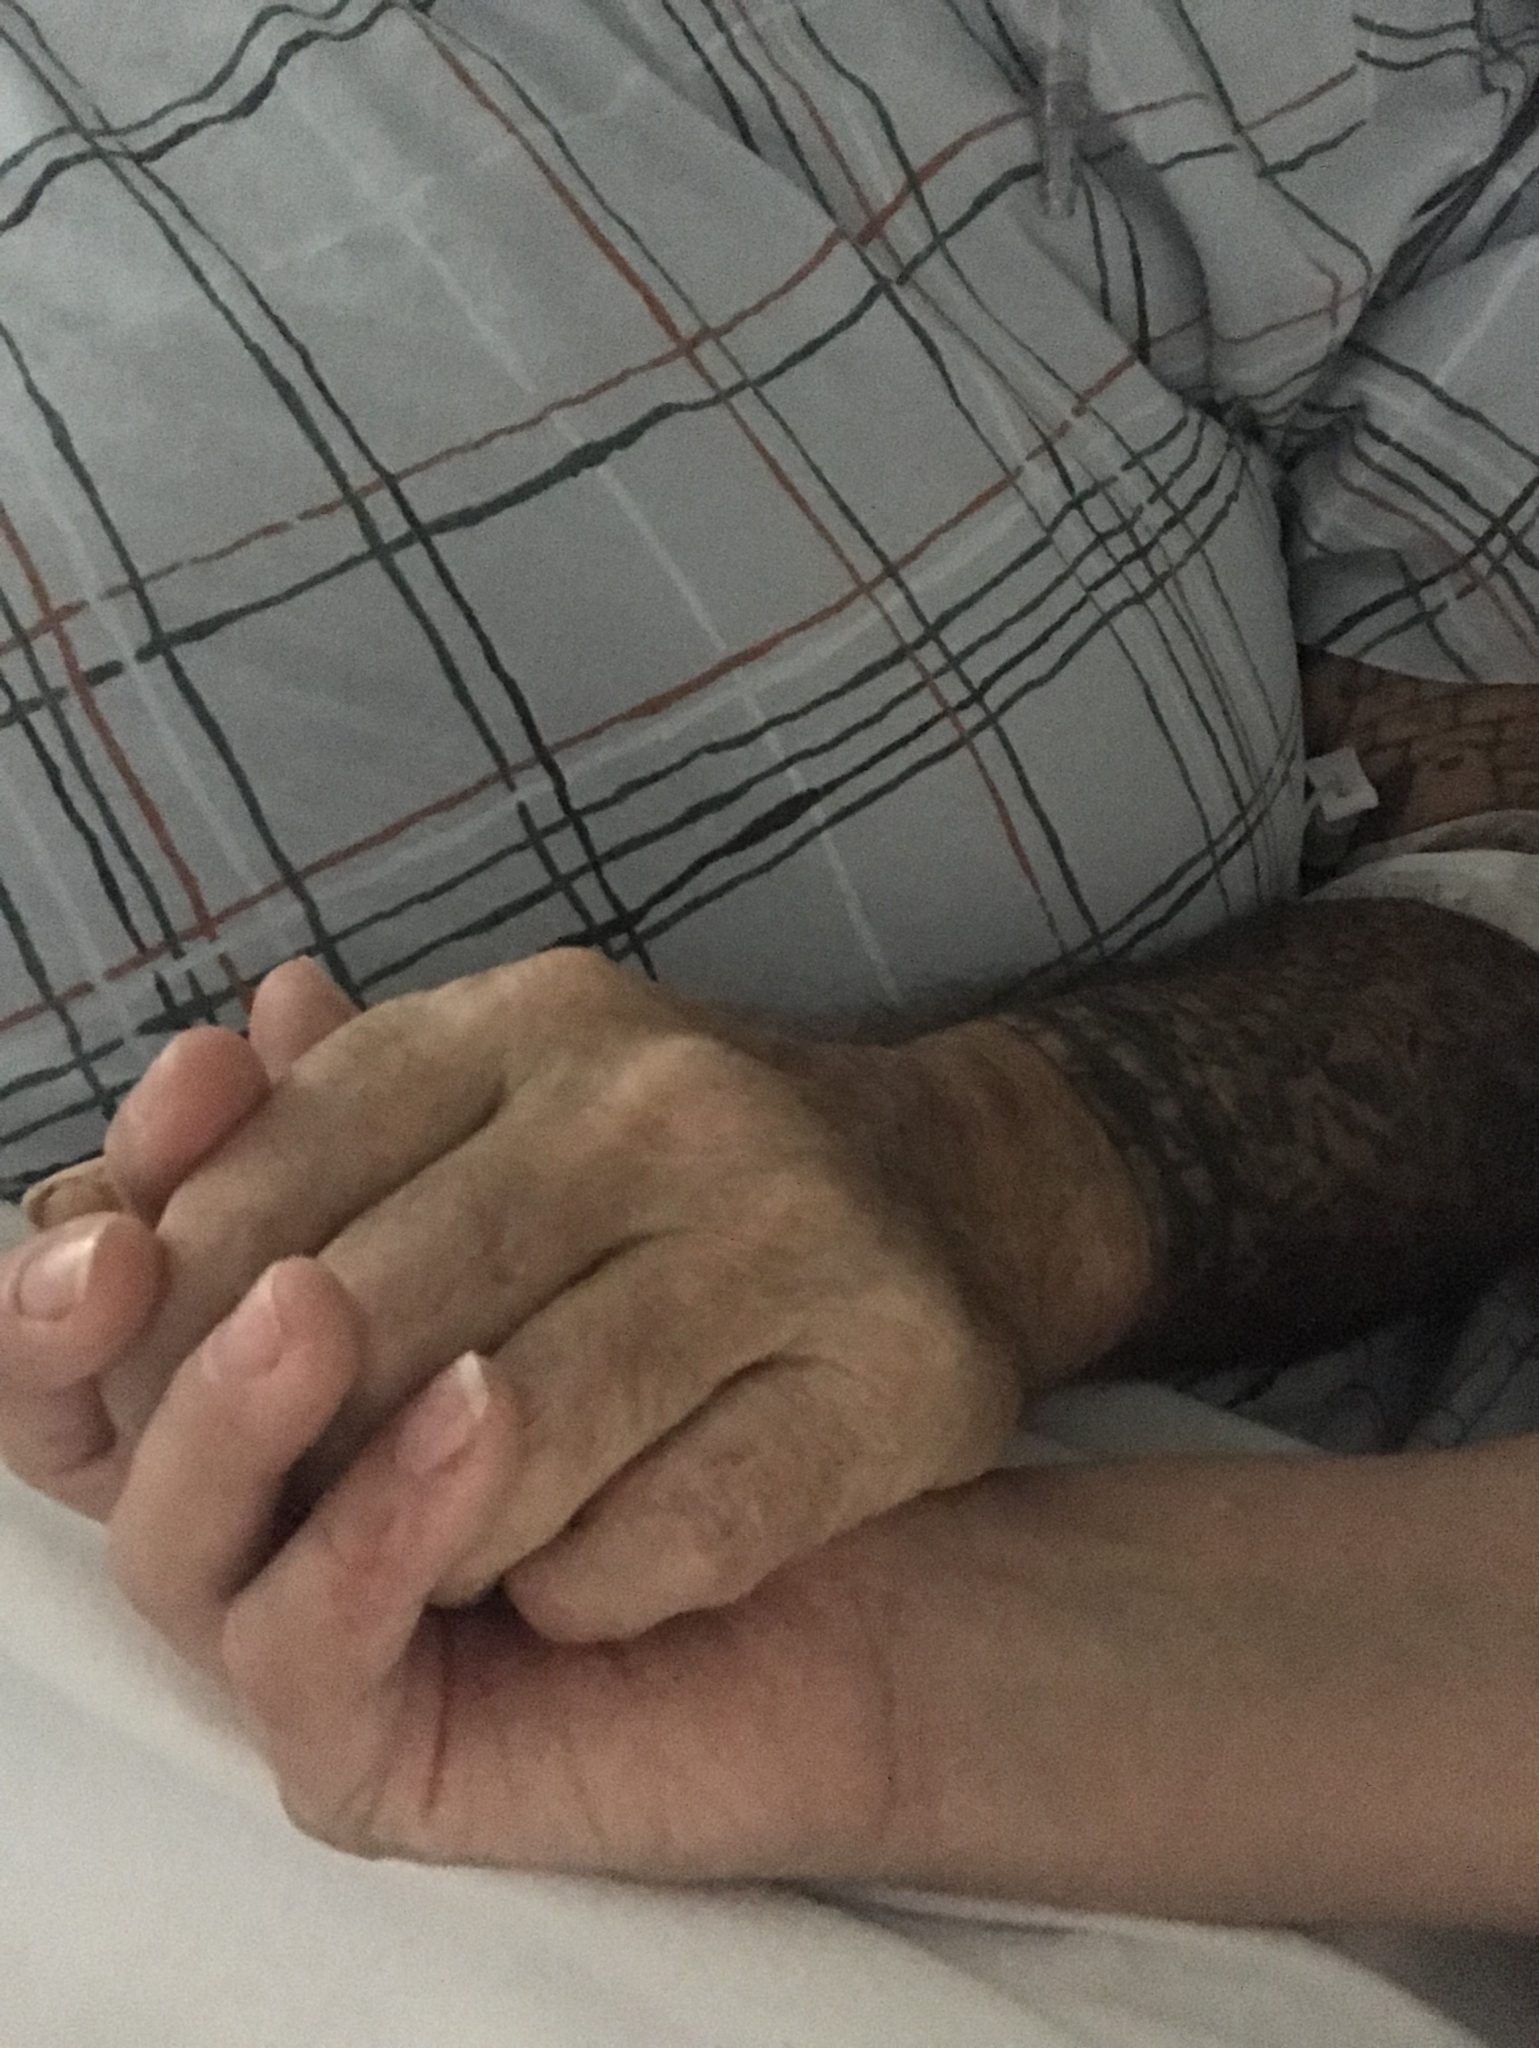 Holding Deans hand in Hospice